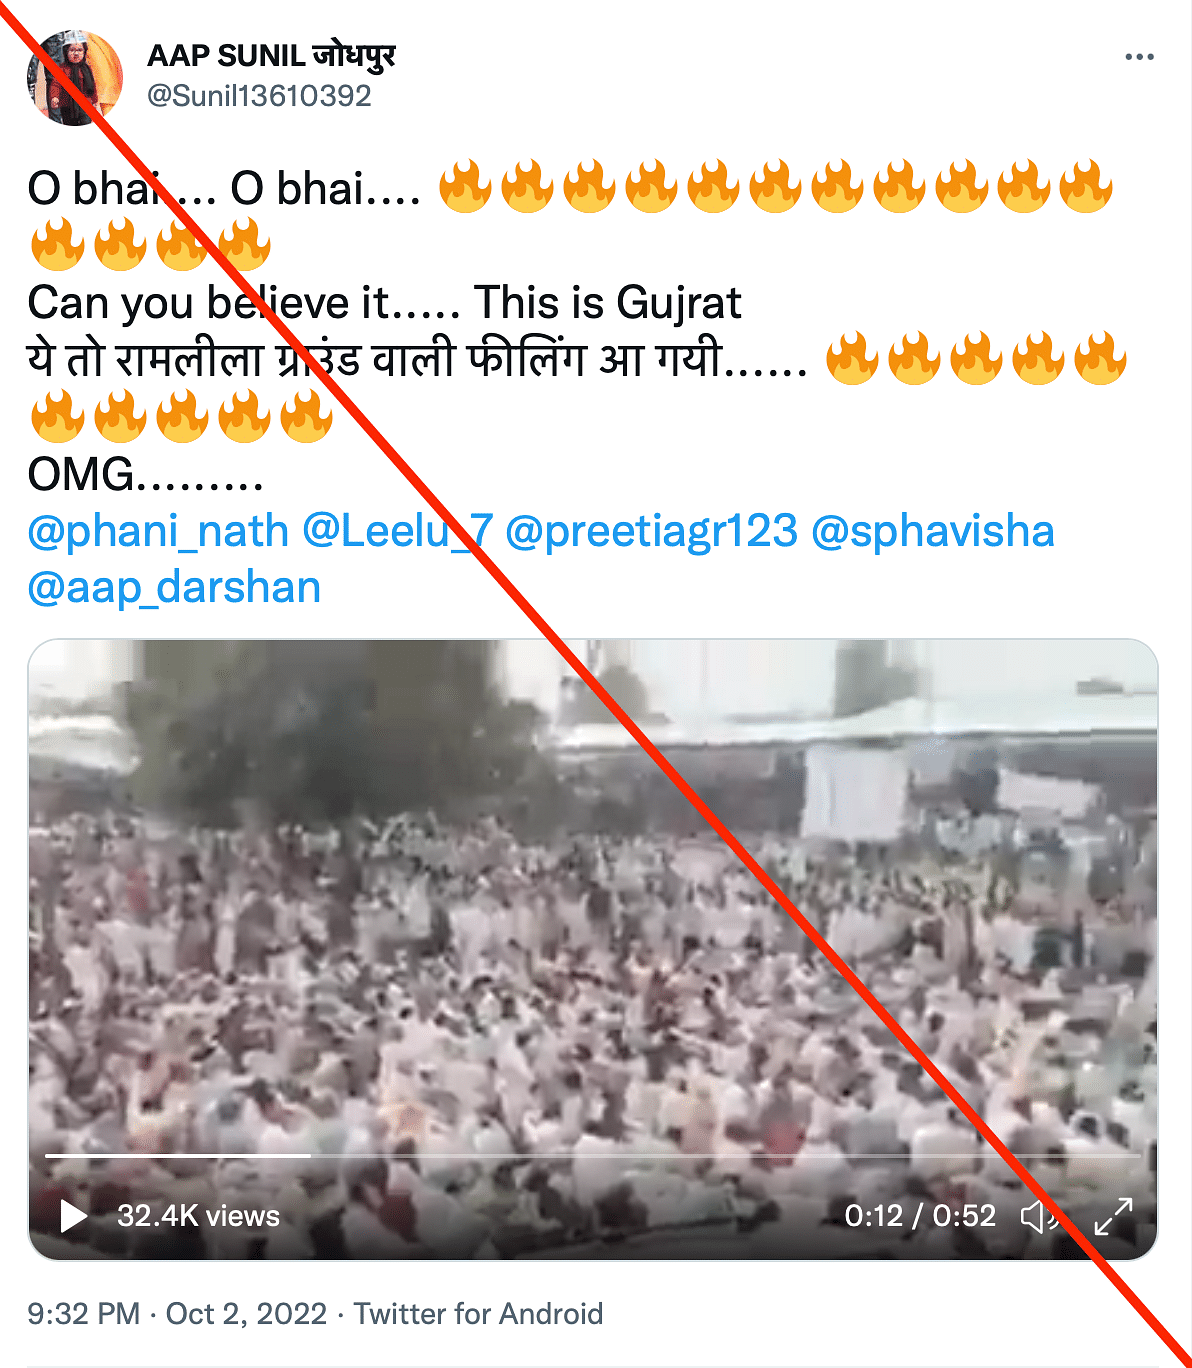 The video is from a Kisan Maha Sammelan, organised by AAP in Punjab's Moga district in March 2021.